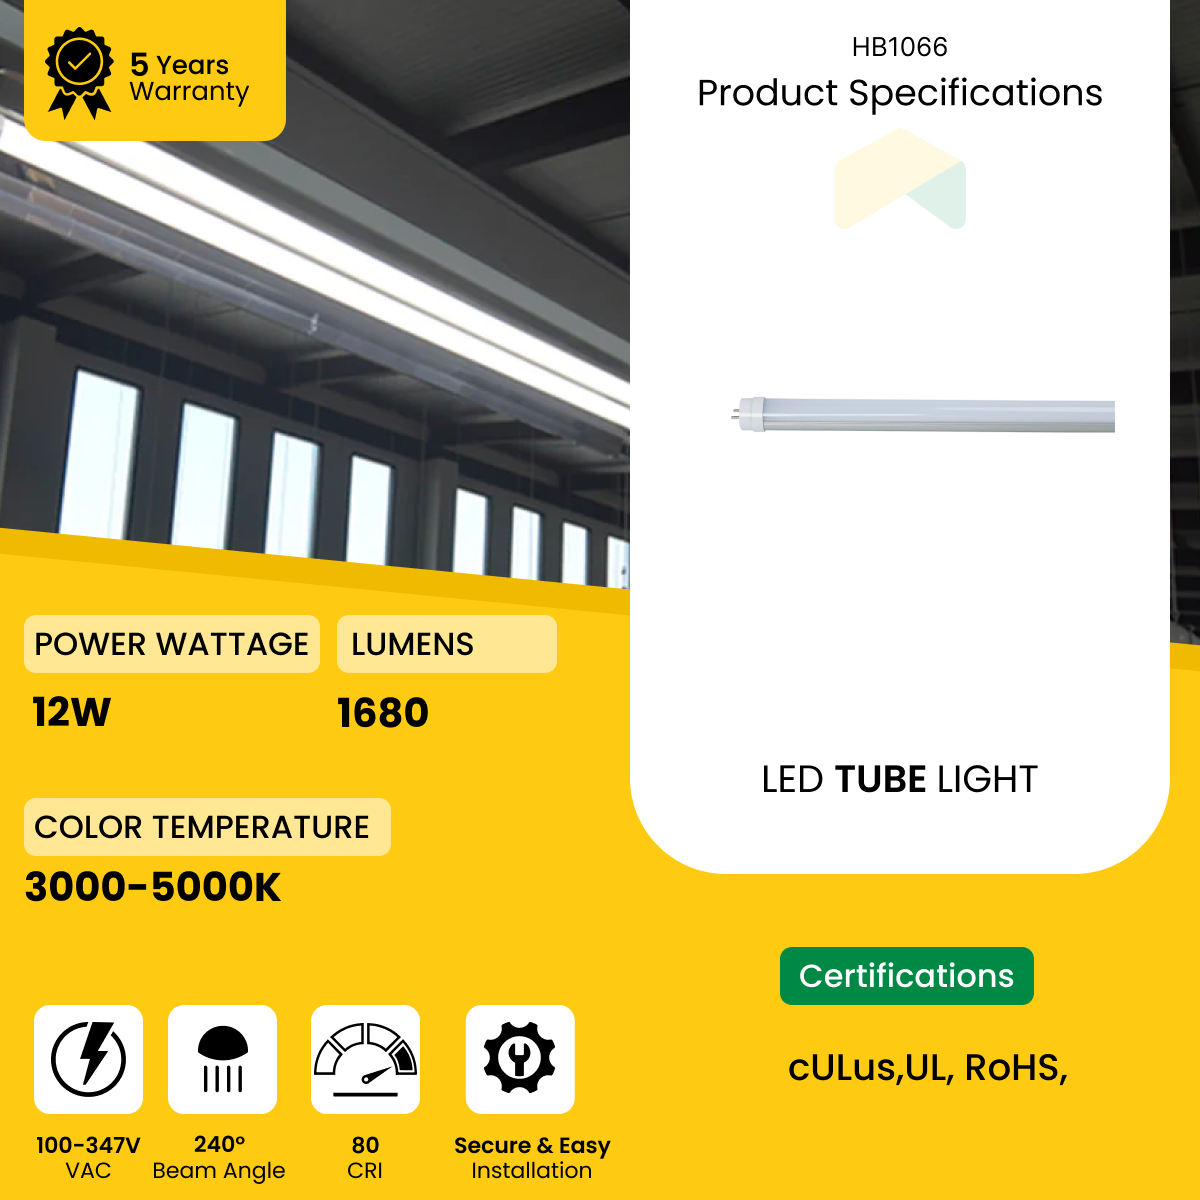 2ft T8 LED Tube Light - 12W, 4000K, 1650 Lumens, Ballast Compatible, Plug and Play, Aluminum Housing, 100-277VAC, Frosted Lens - 42 Pack